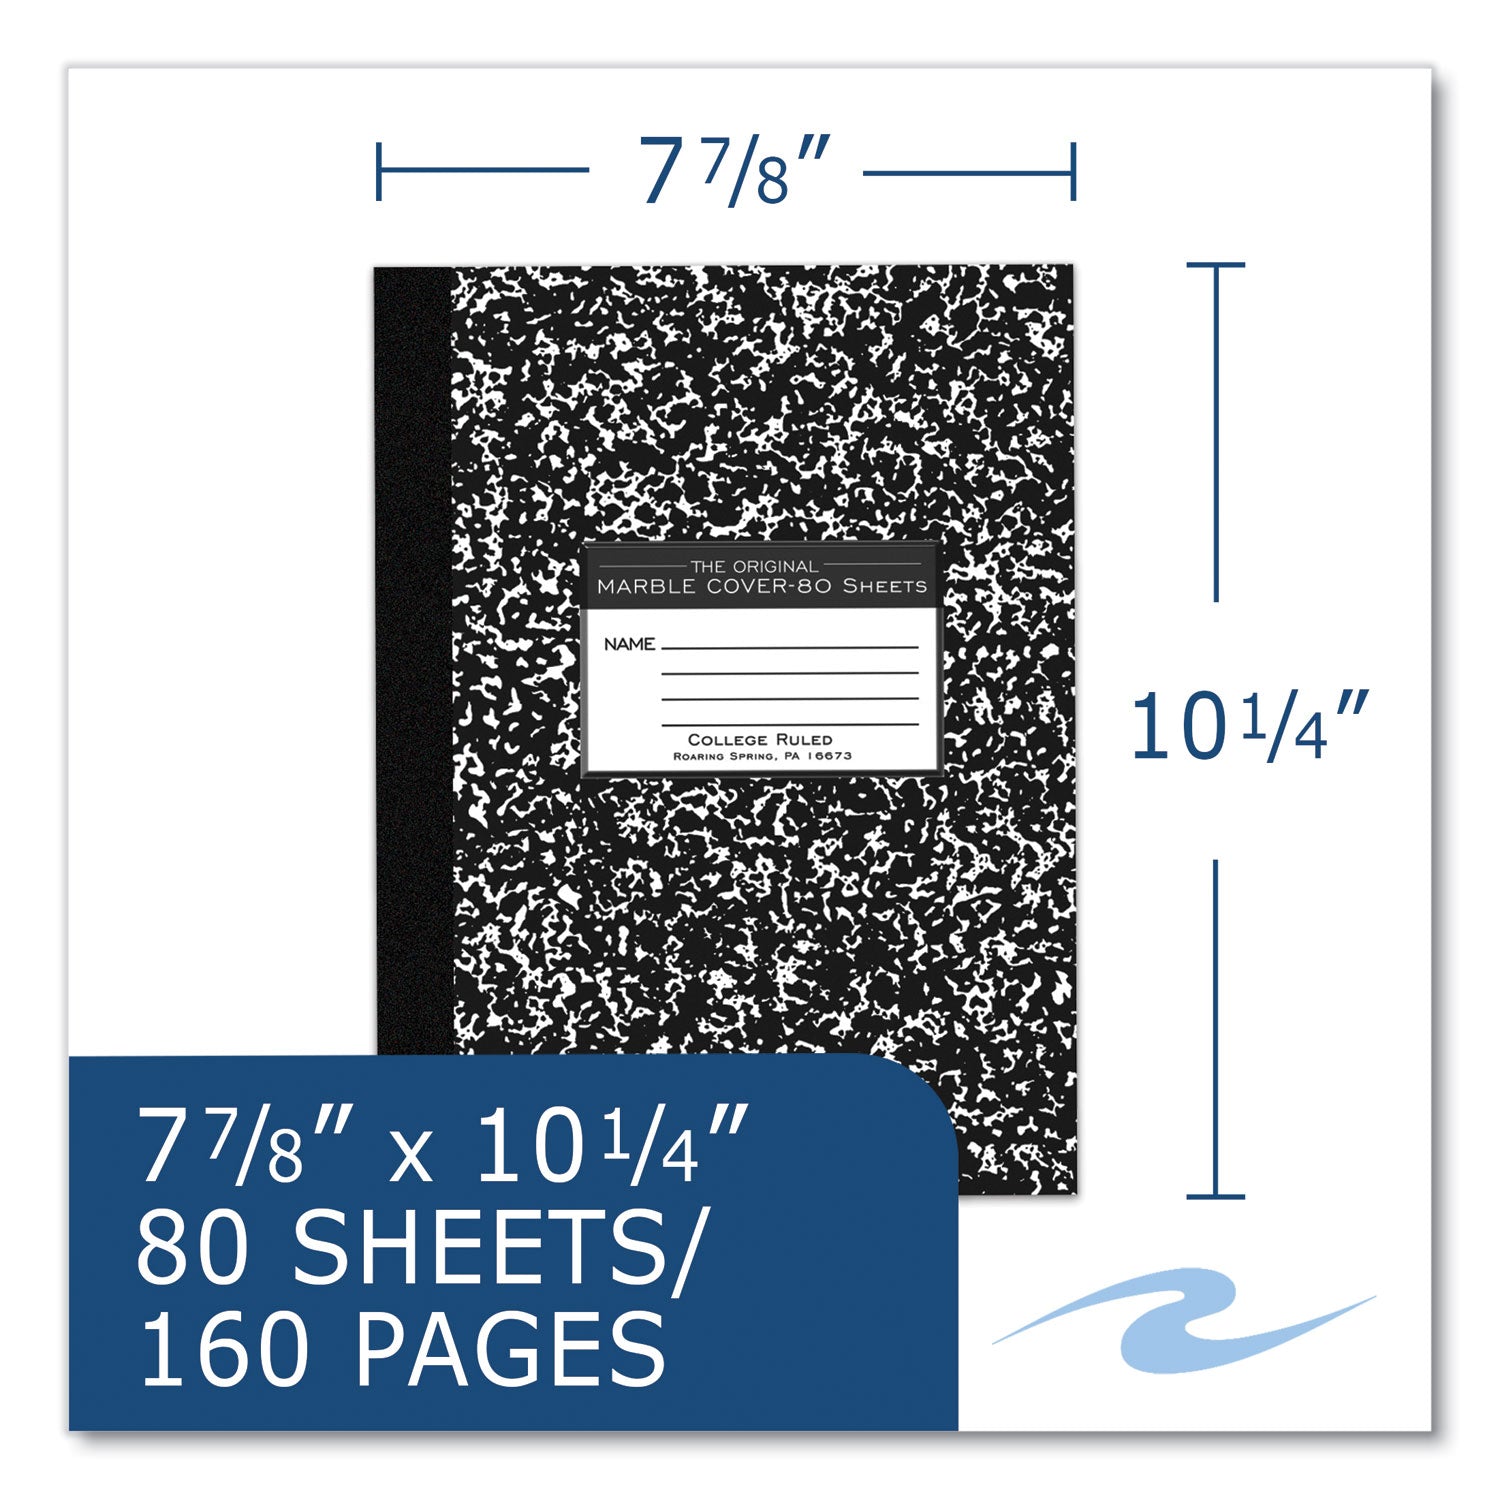 flexible-cover-composition-book-med-college-rule-black-marble-cover-80-1025-x-788-sheet-48-ct-ships-in-4-6-bus-days_roa77481cs - 5